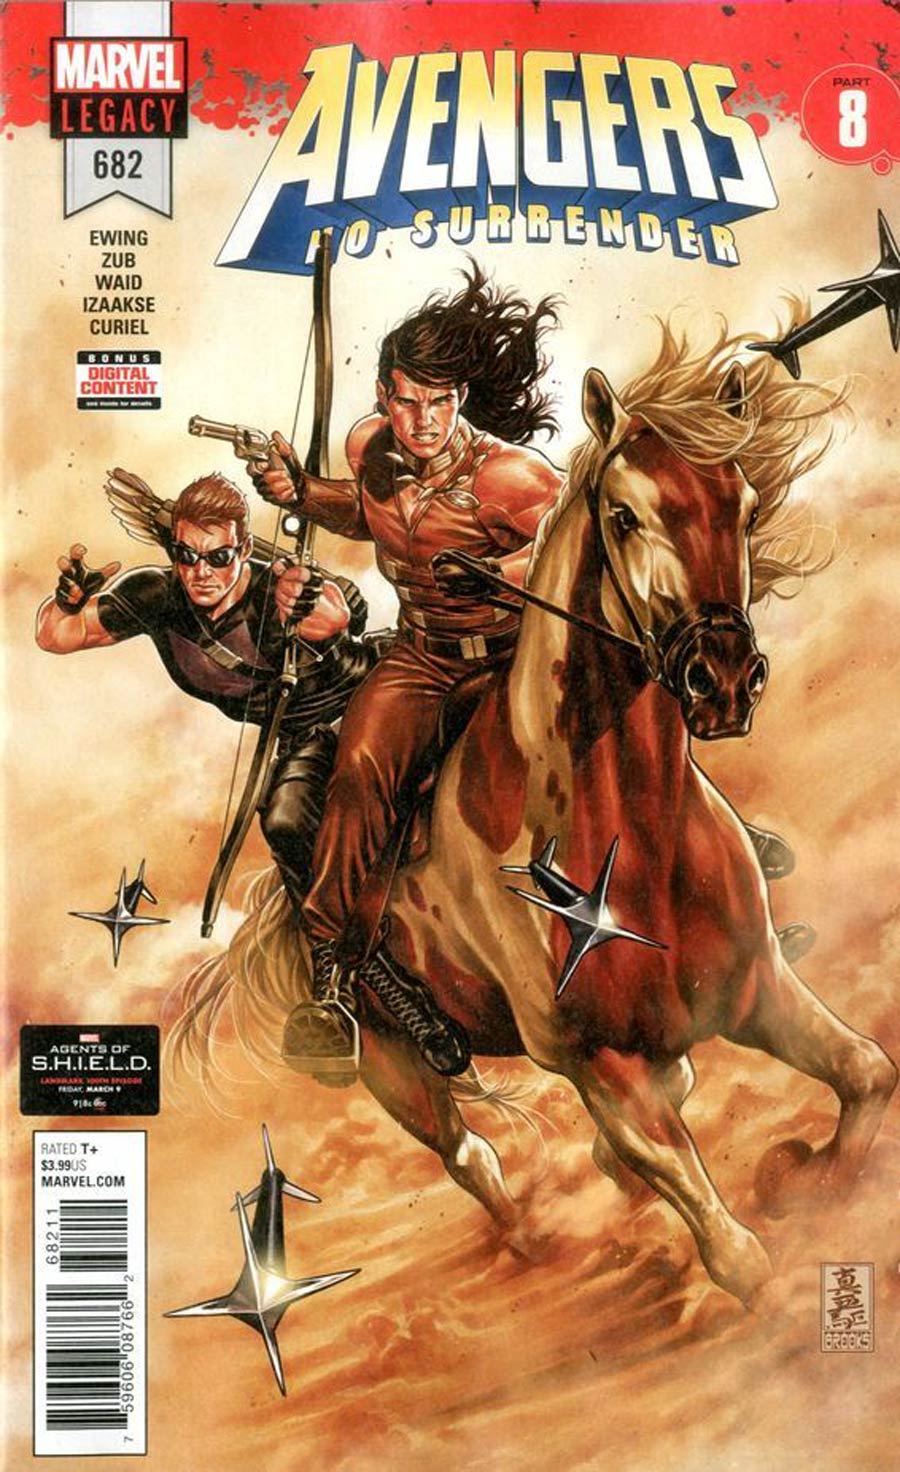 Avengers Vol 6 #682 Cover D Modern Hawkeye Secret Chase Variant Cover (No Surrender Part 8)(Marvel Legacy Tie-In)